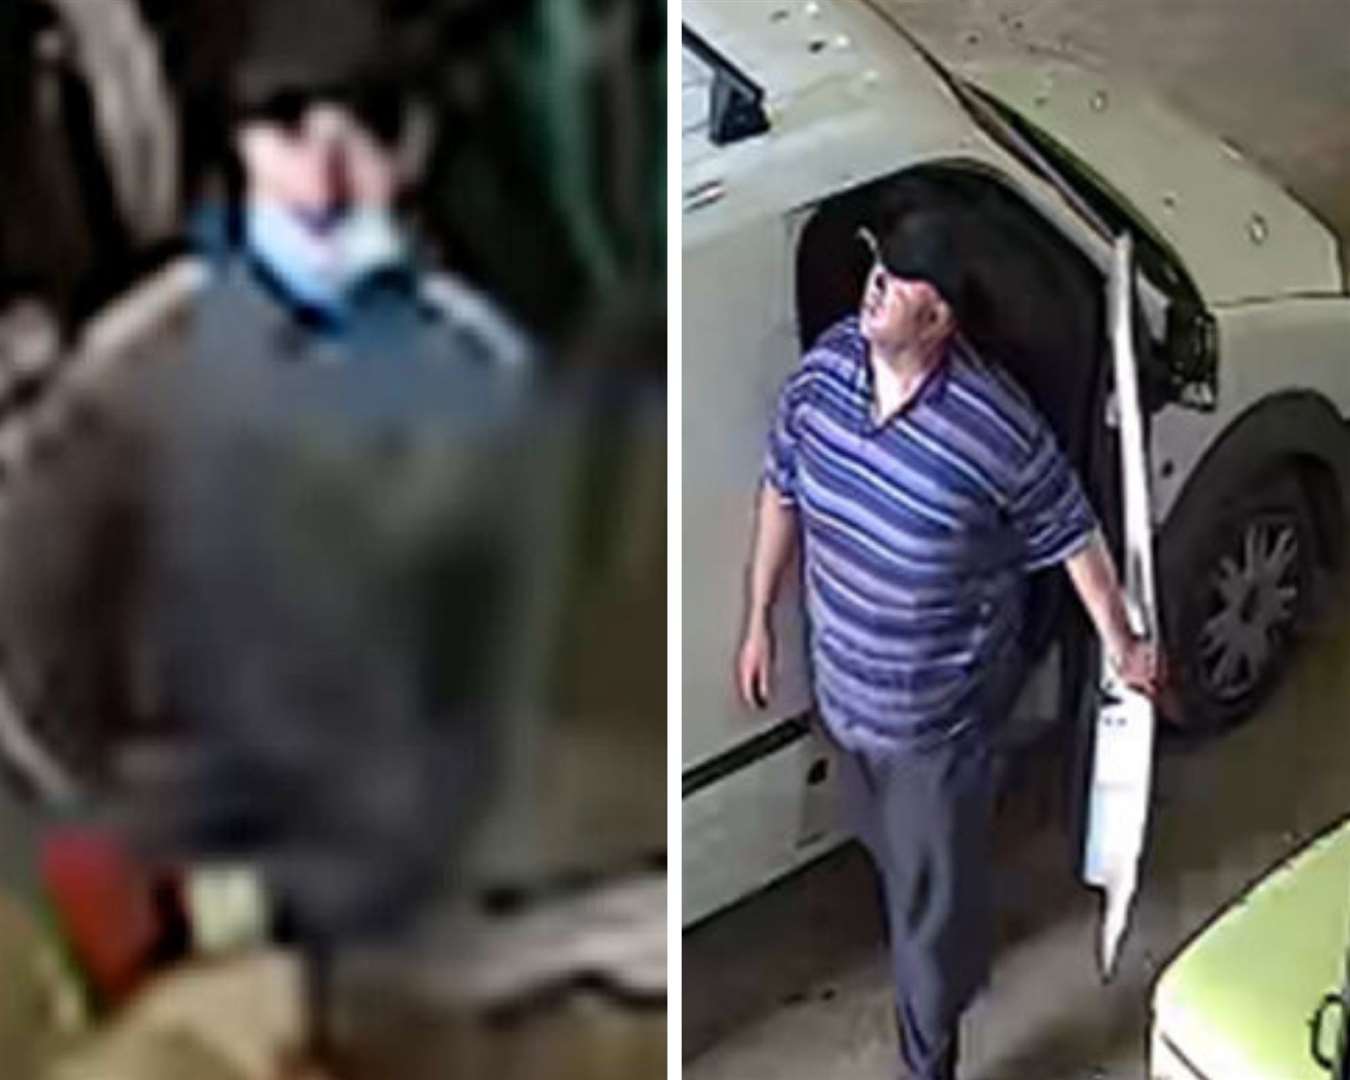 The two men wanted for questioning by Kent Police